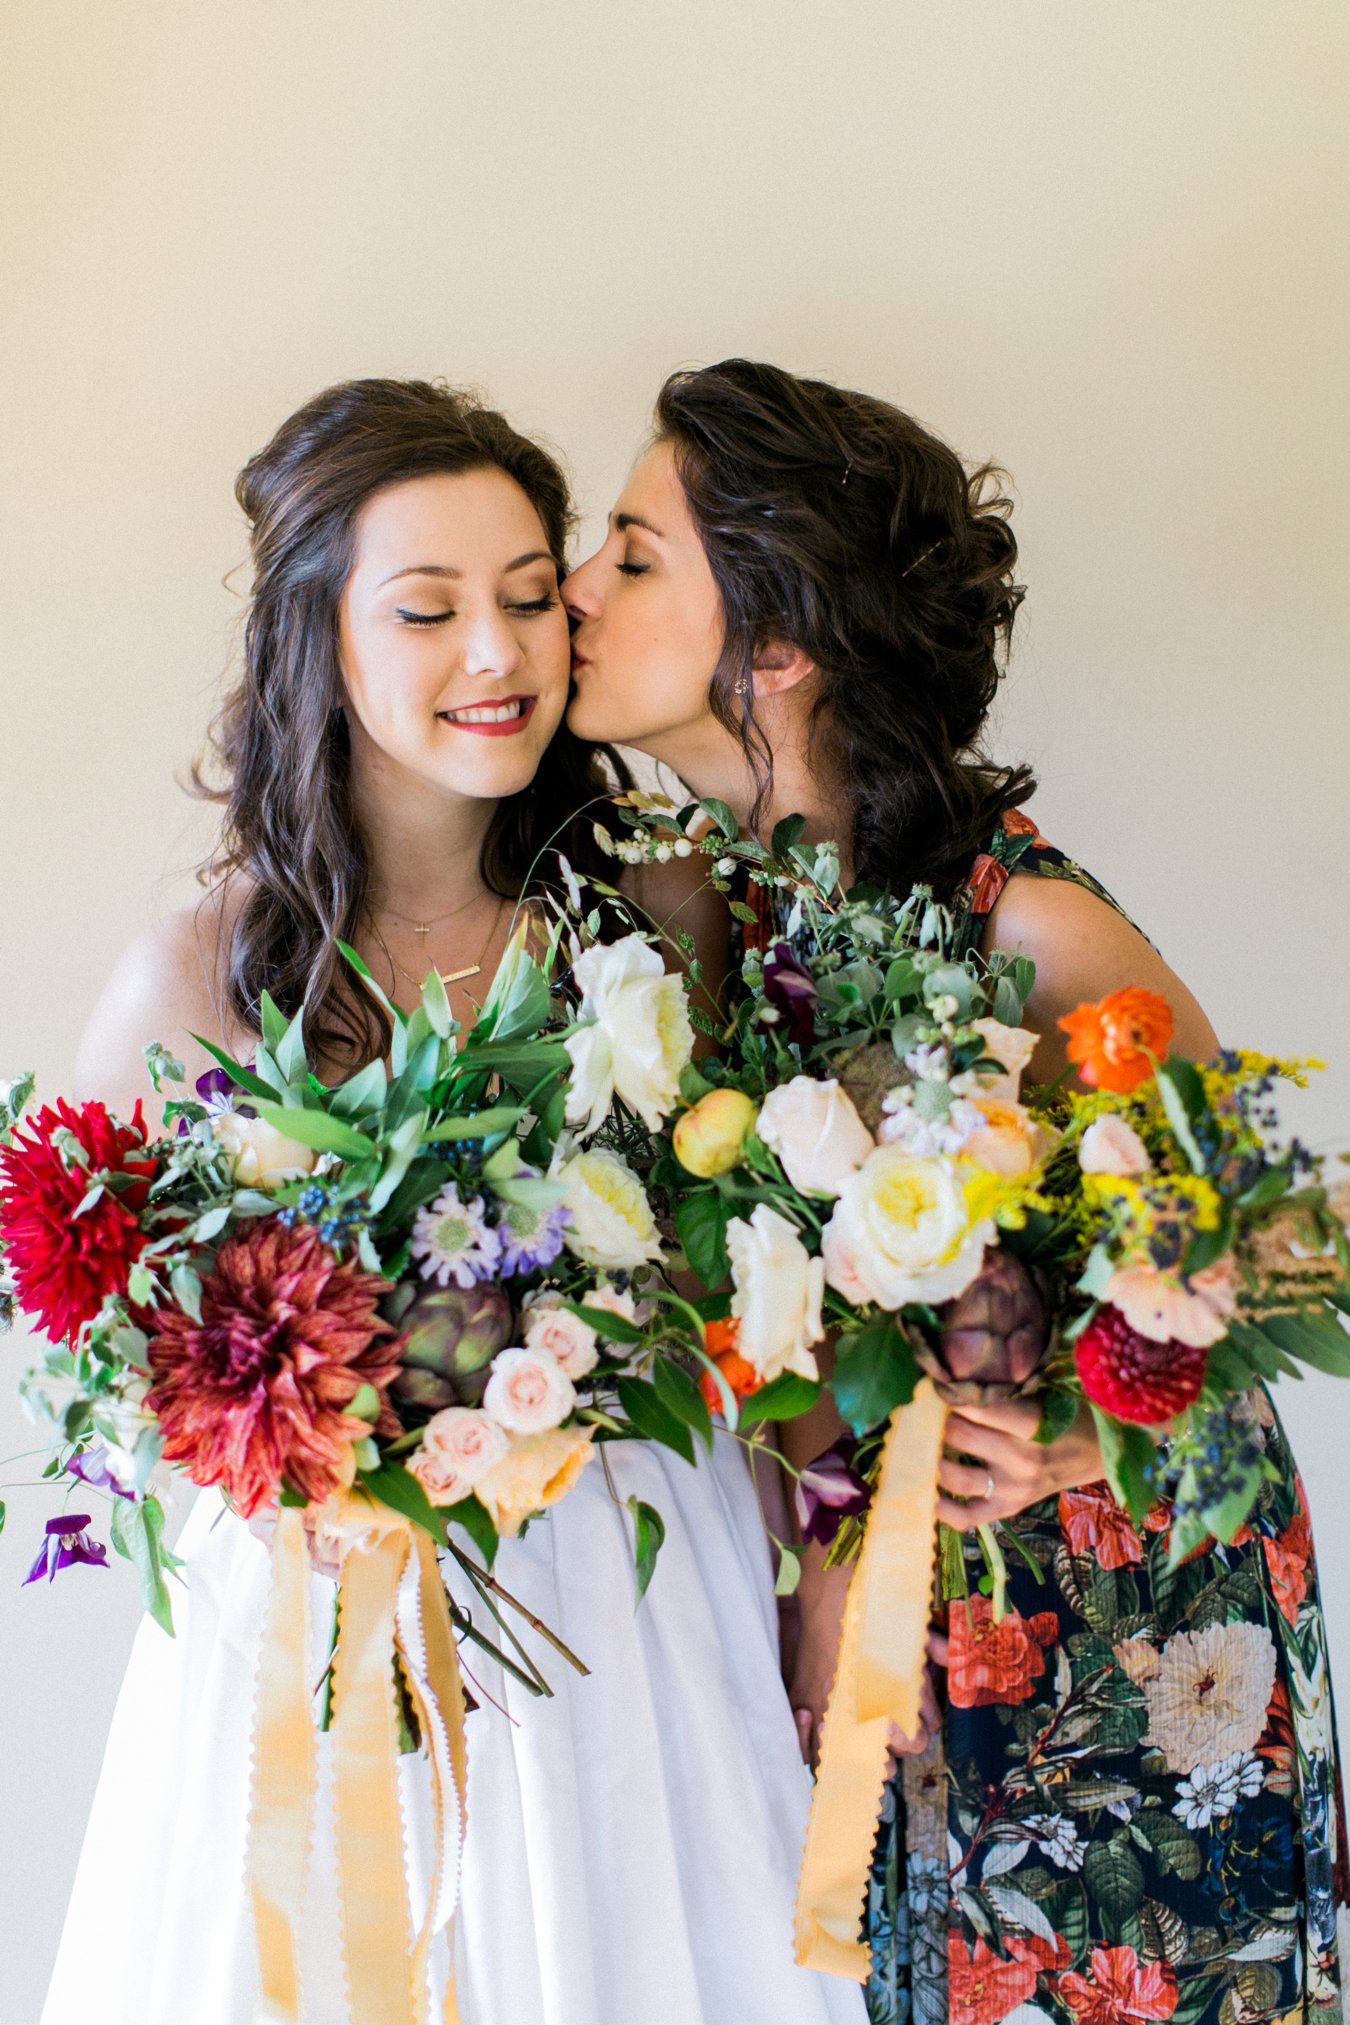 The Day's Design Floral | Bright & Bold bouquet | Cory Weber Photography